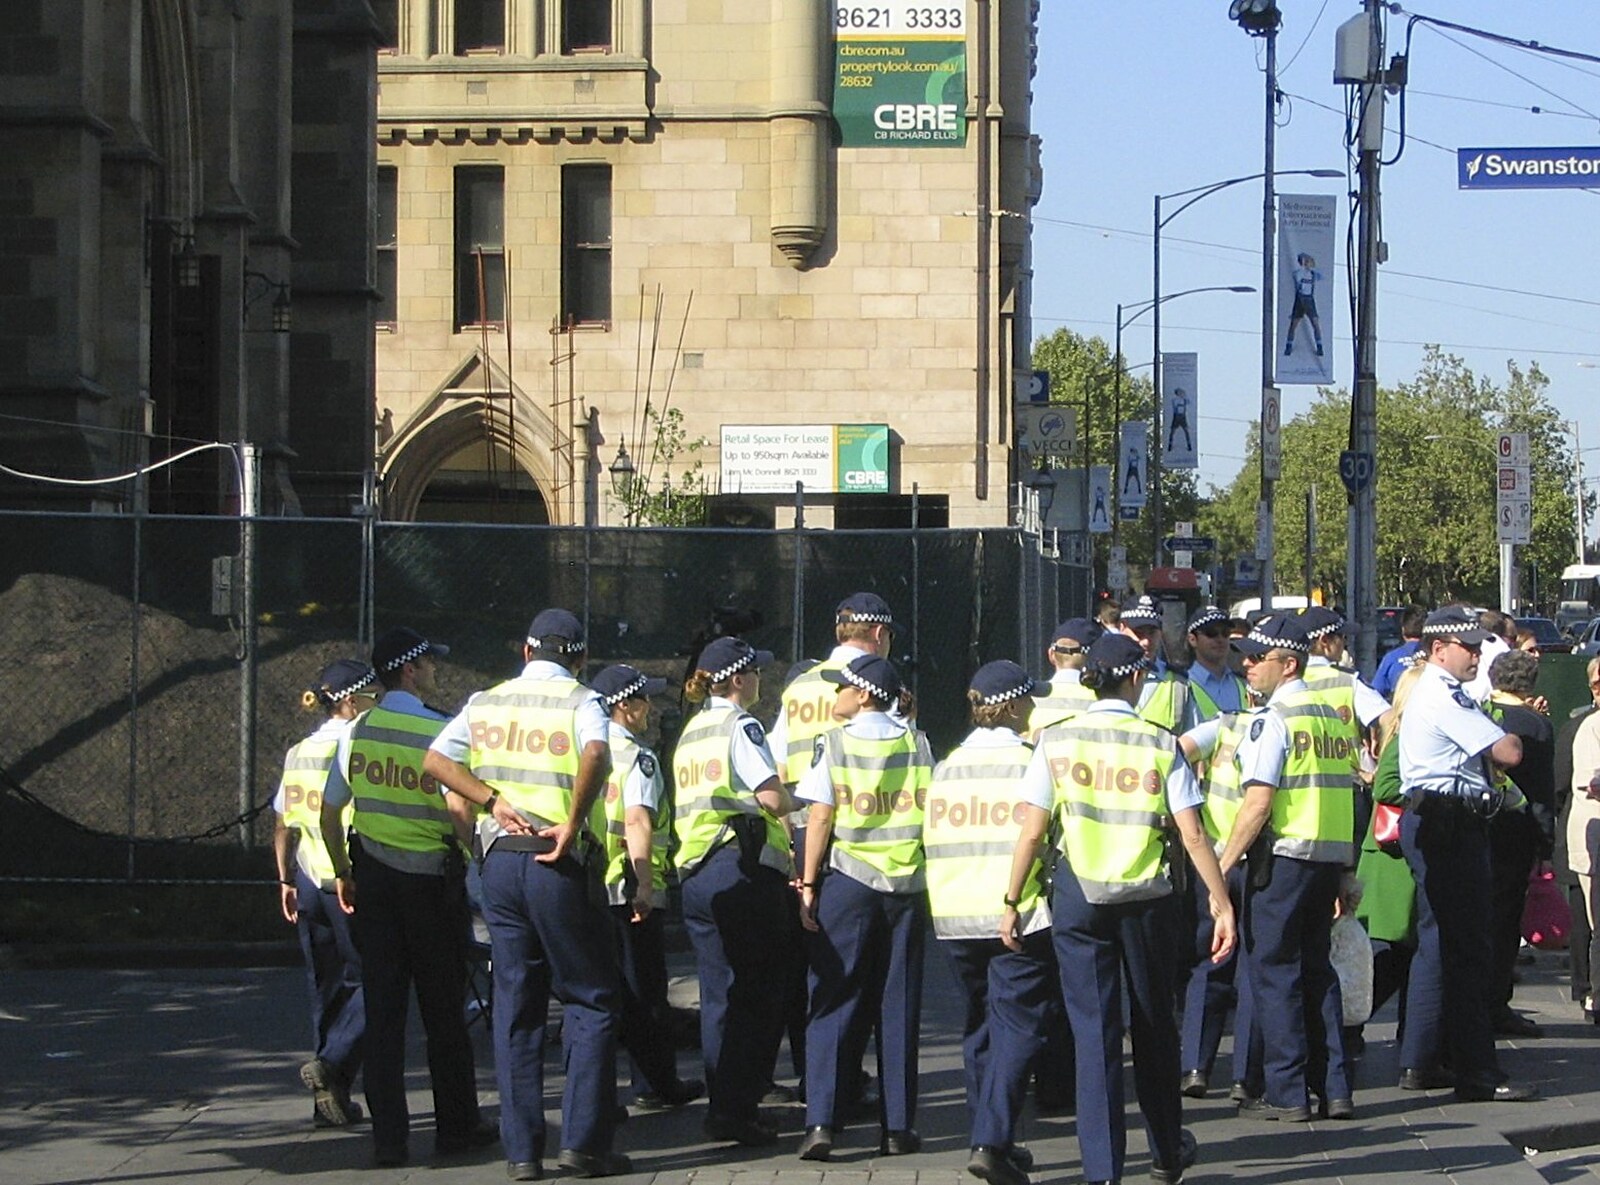 There's some police action on Swanston Street from A Couple of Days in Melbourne, Victoria, Australia - 5th October 2004